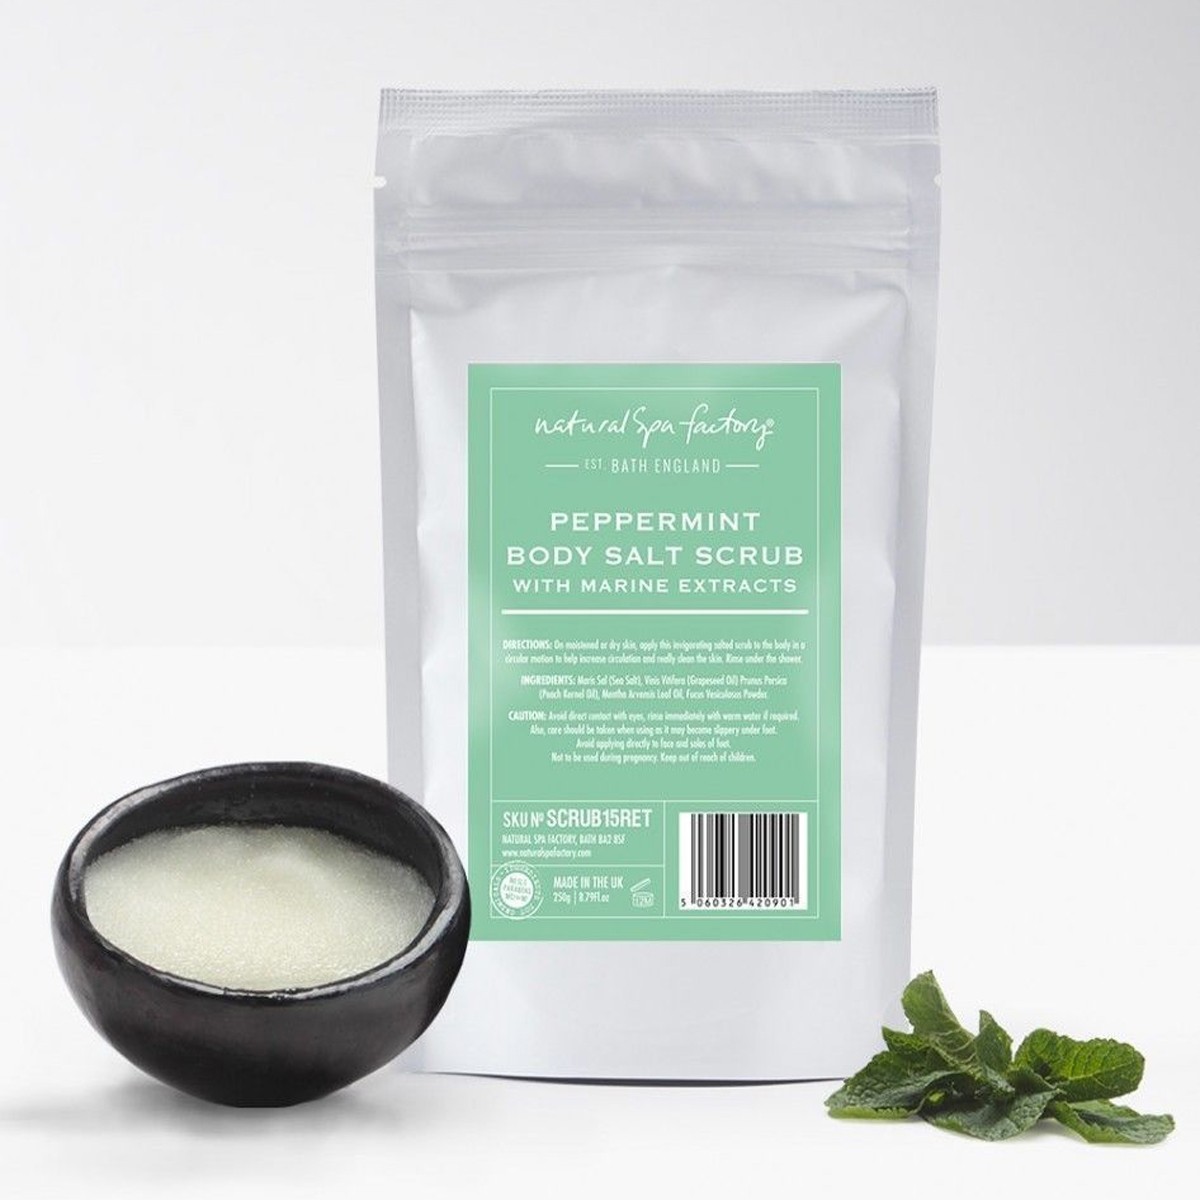 Natural Spa Factory Peppermint & Marine Extracts Body Scrub 